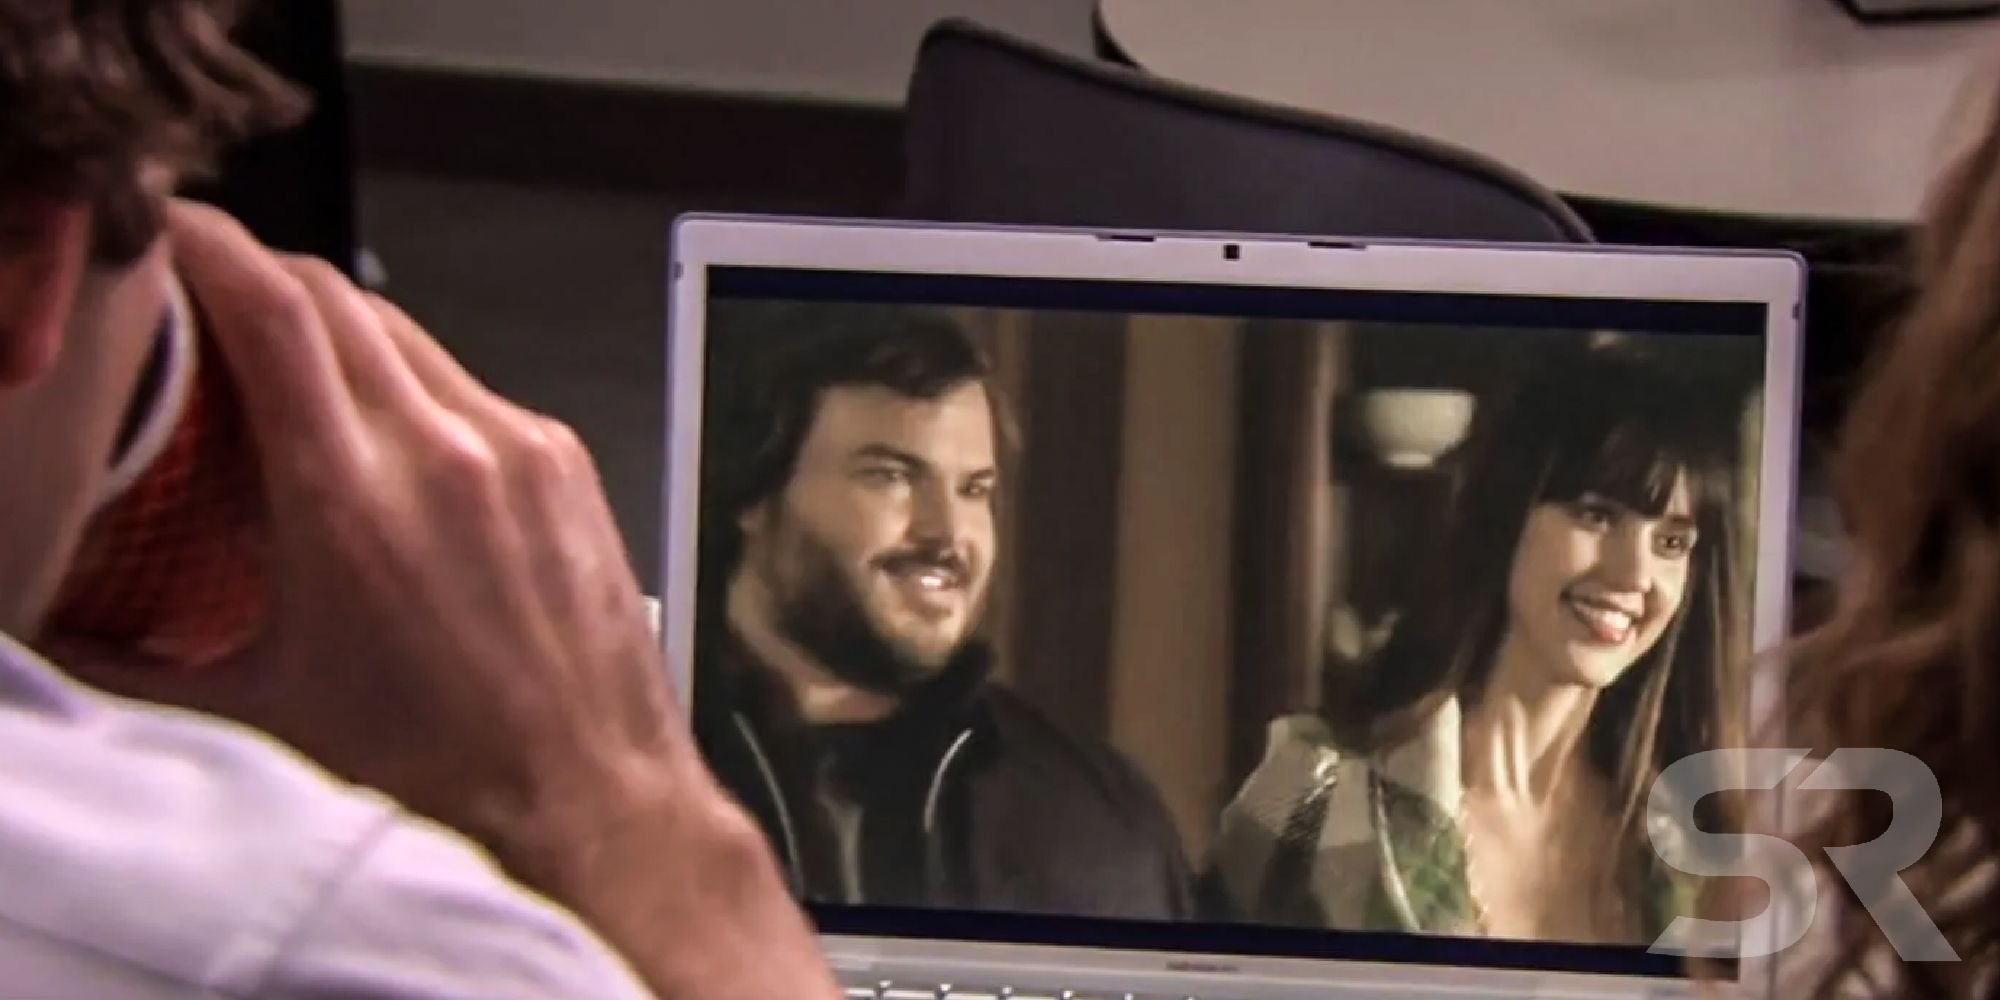 The Office The True Story Behind Jack Black & Jessica Alba’s Cameos